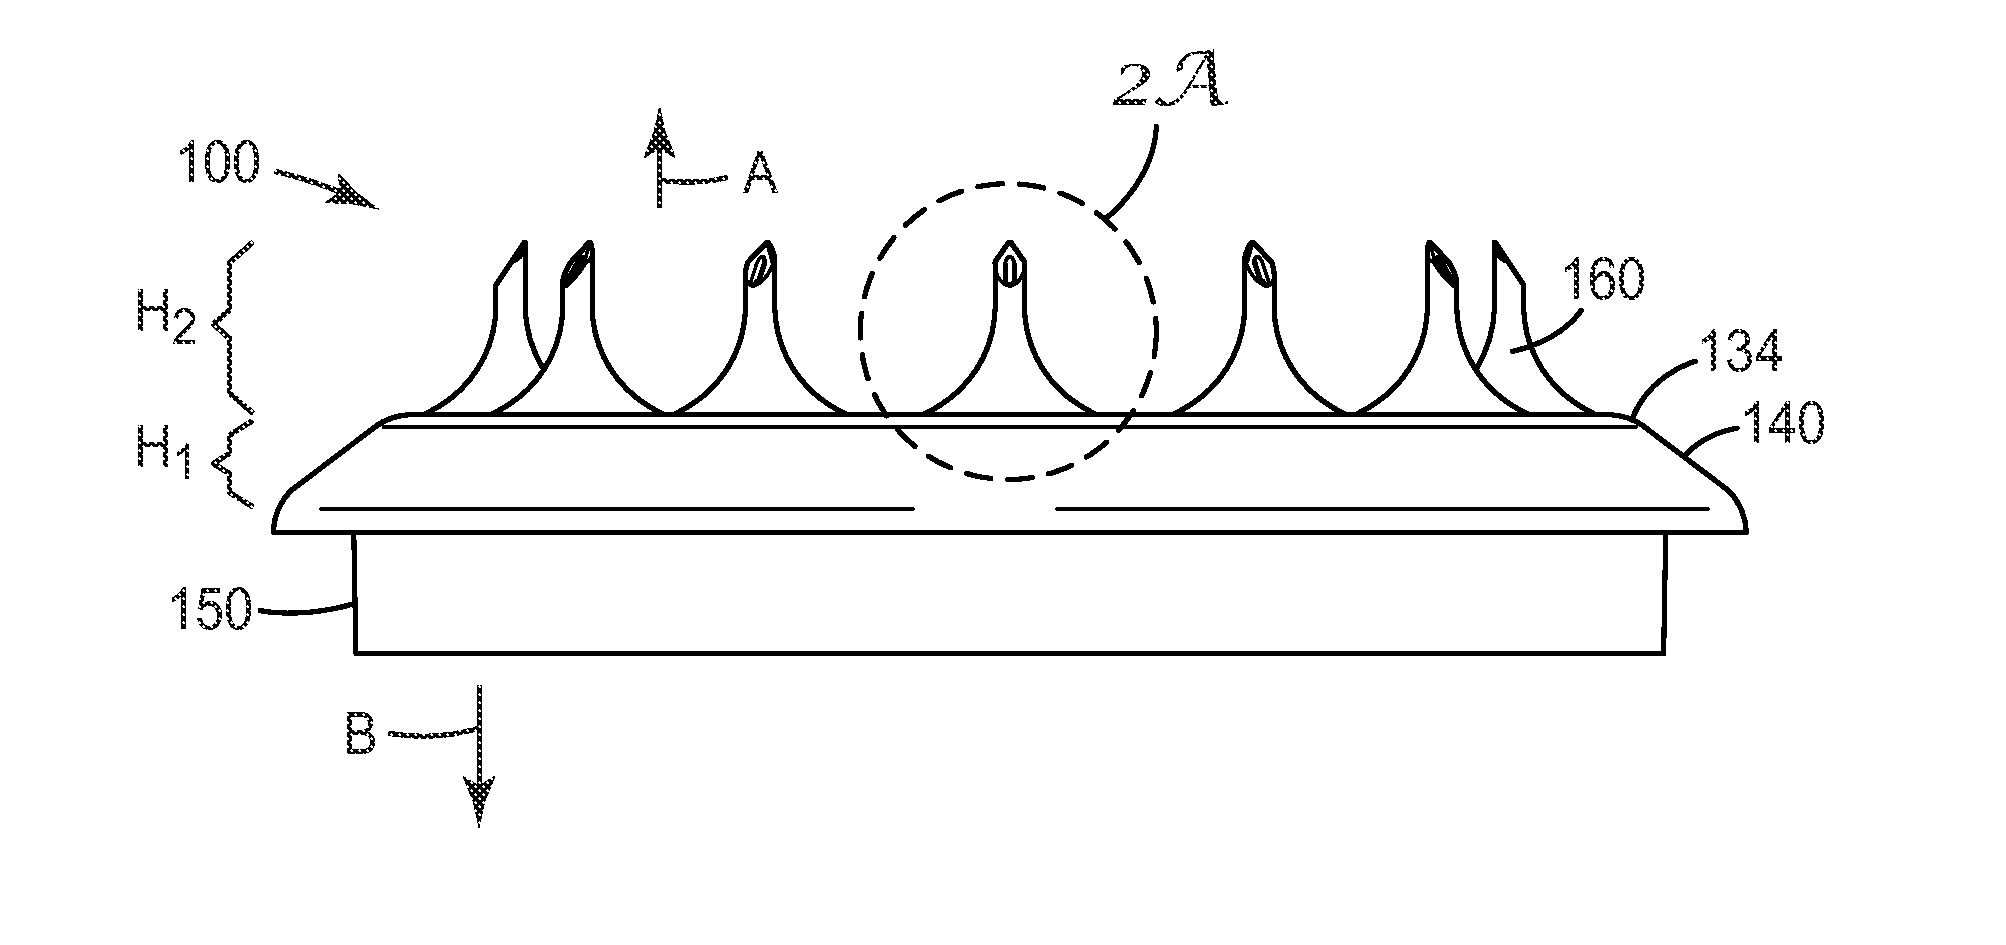 Article comprising a microneedle